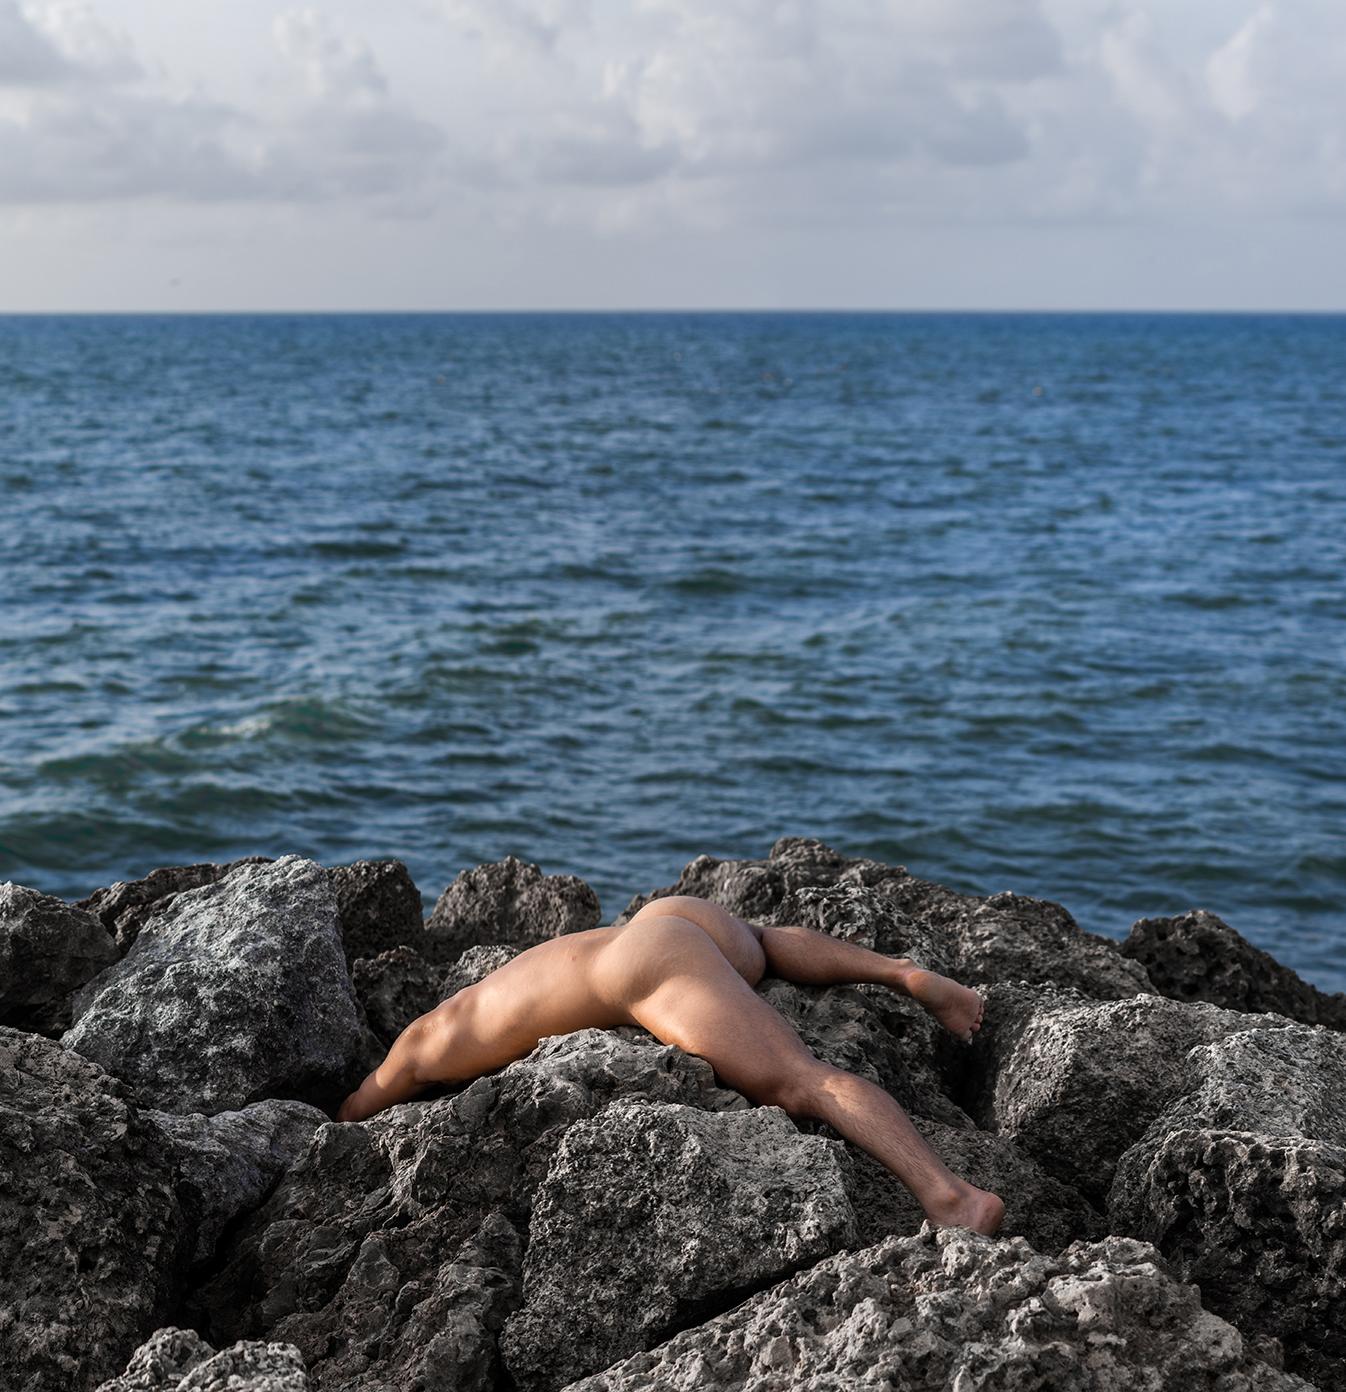 Engulfment - Cartagena 1. From the series Engulfment. Color Nude photograph - Contemporary Photograph by Javier Rey